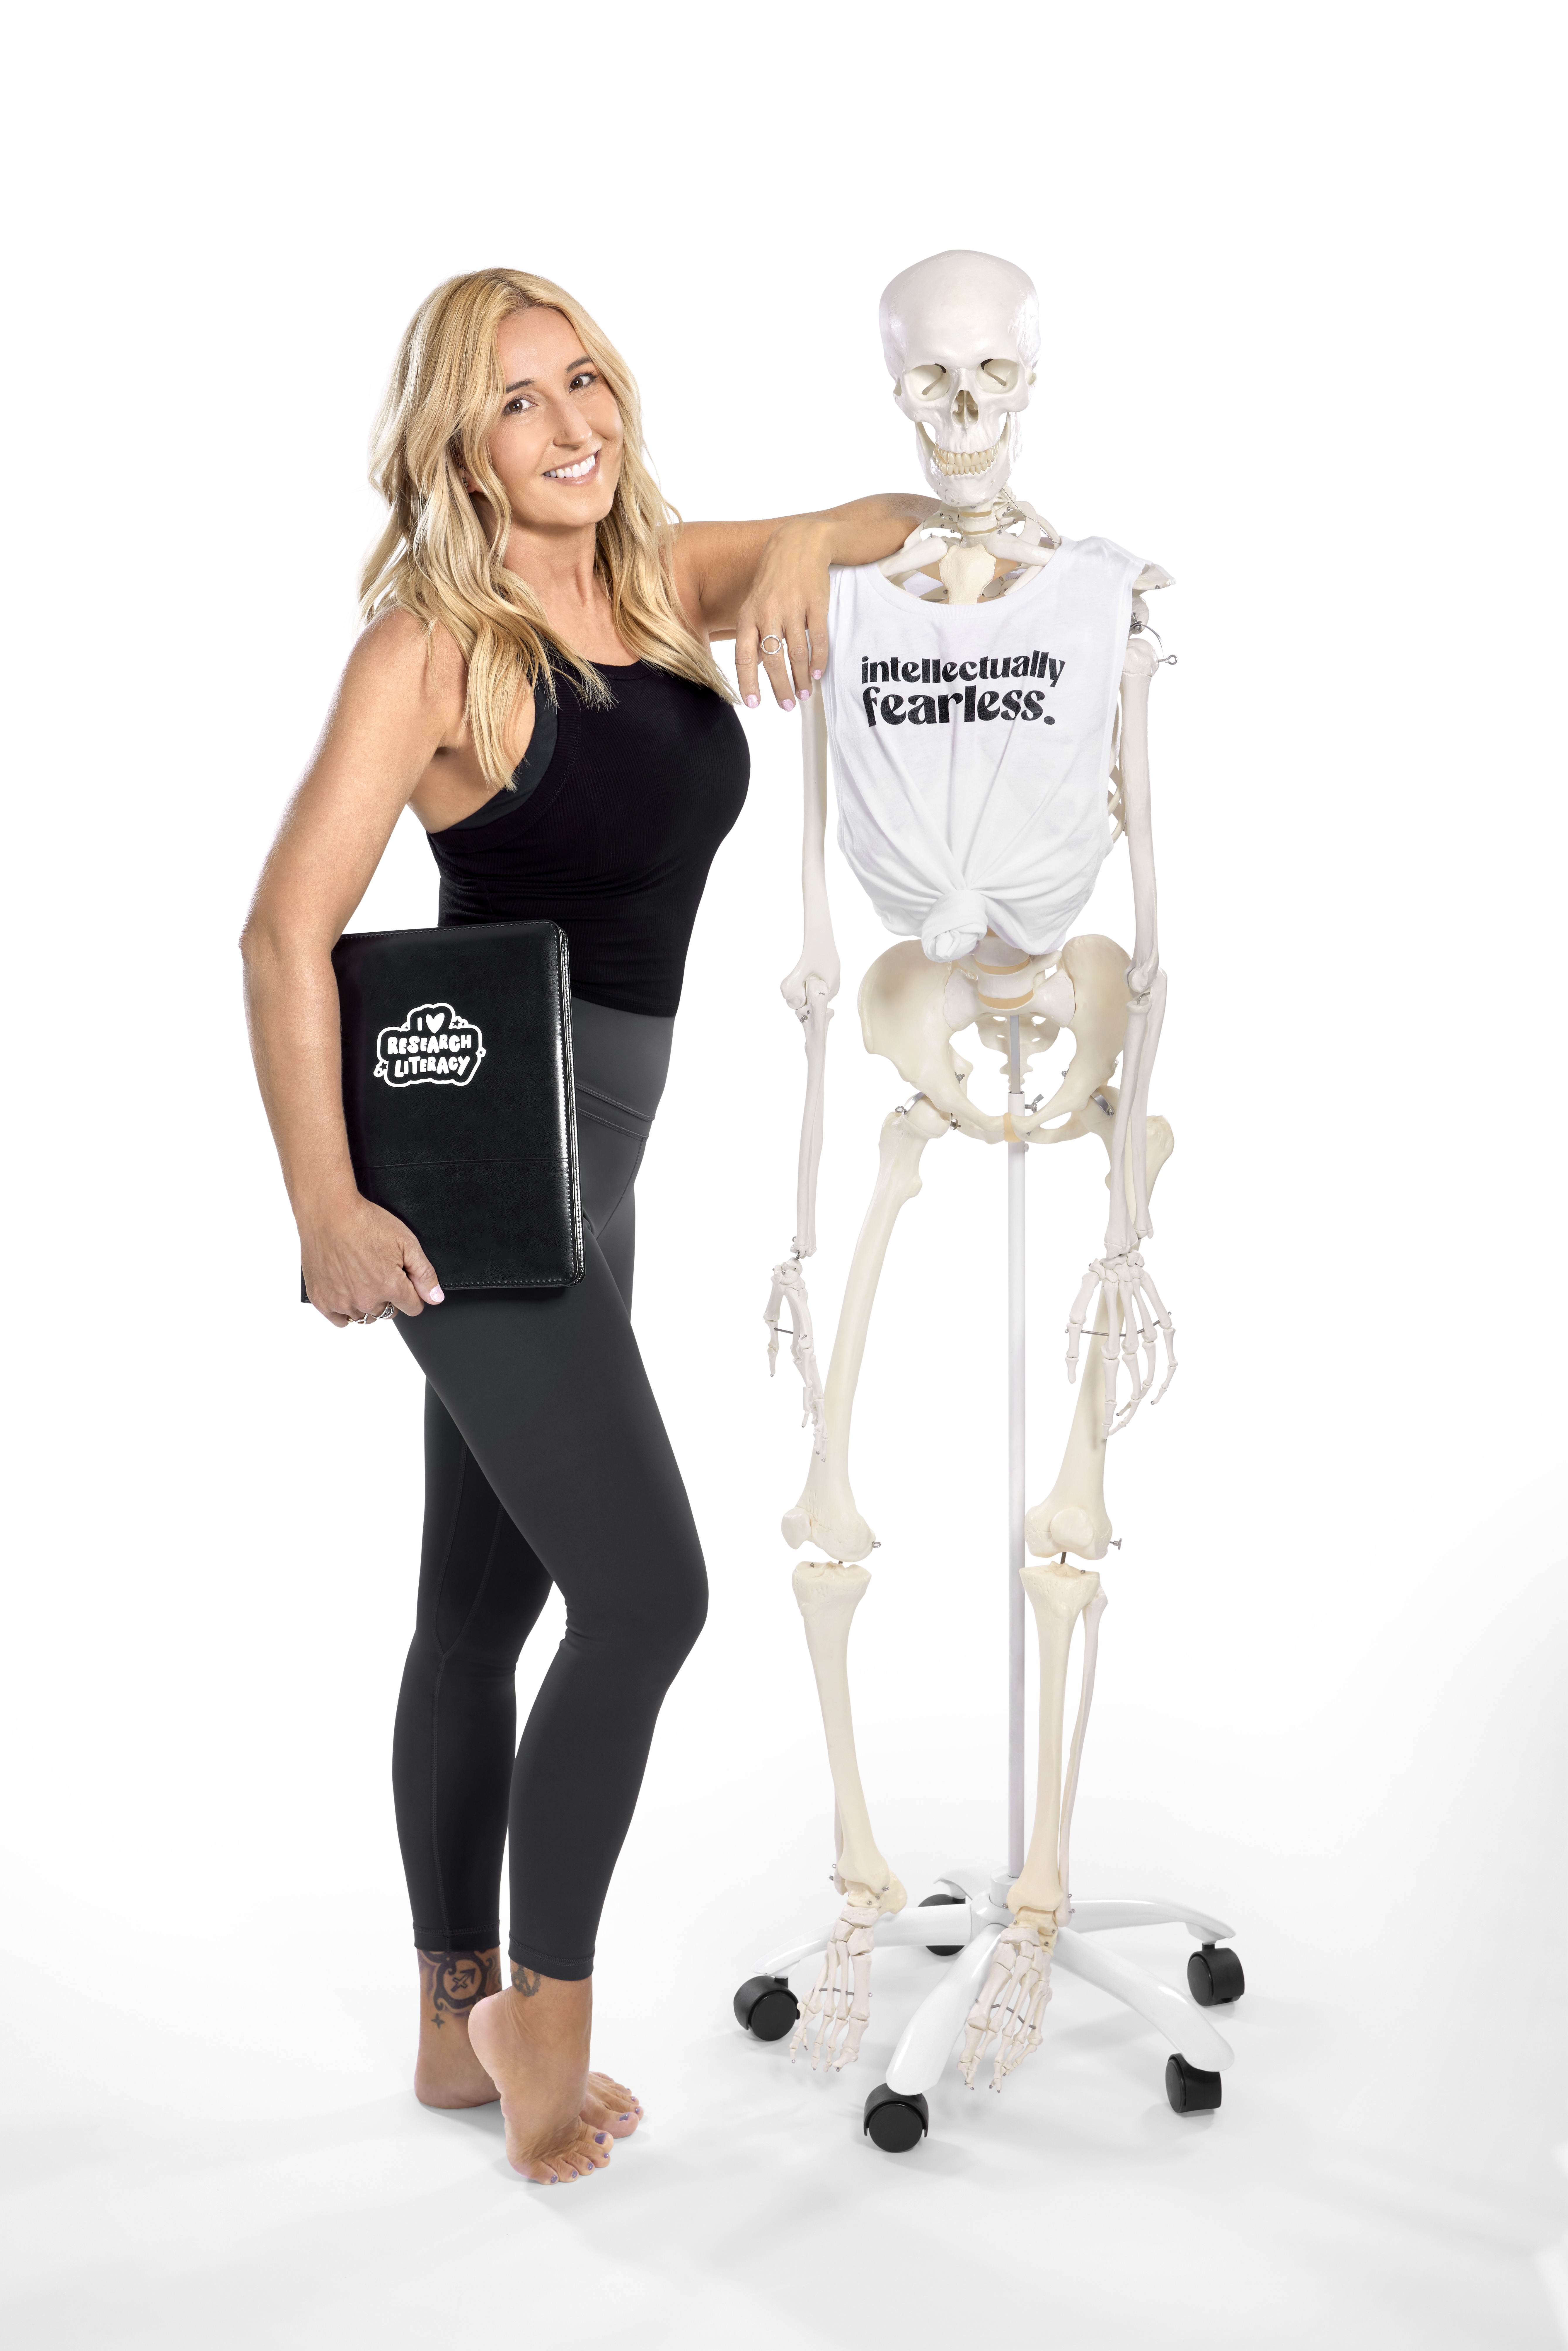 Jules Mitchell posing with a skeleton wearing a shirt that says "intellectually fearless" and holding a notebook with an "I love research literacy" logo on it.